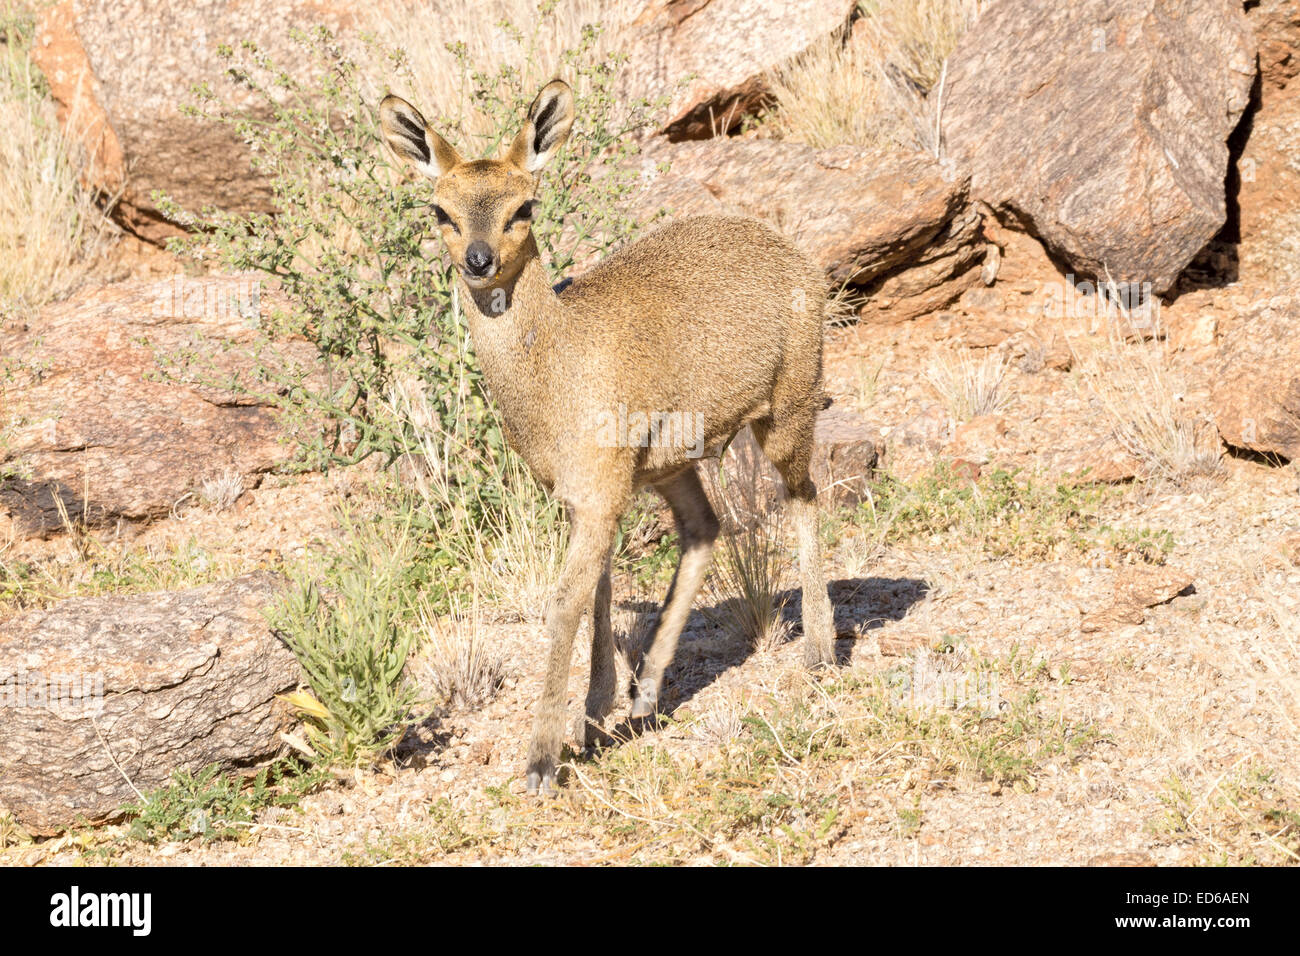 Female Common Duiker, aka grey or bush duiker, Augrabies Falls National Park, Namaqualand, Northern Cape, South Africa Stock Photo